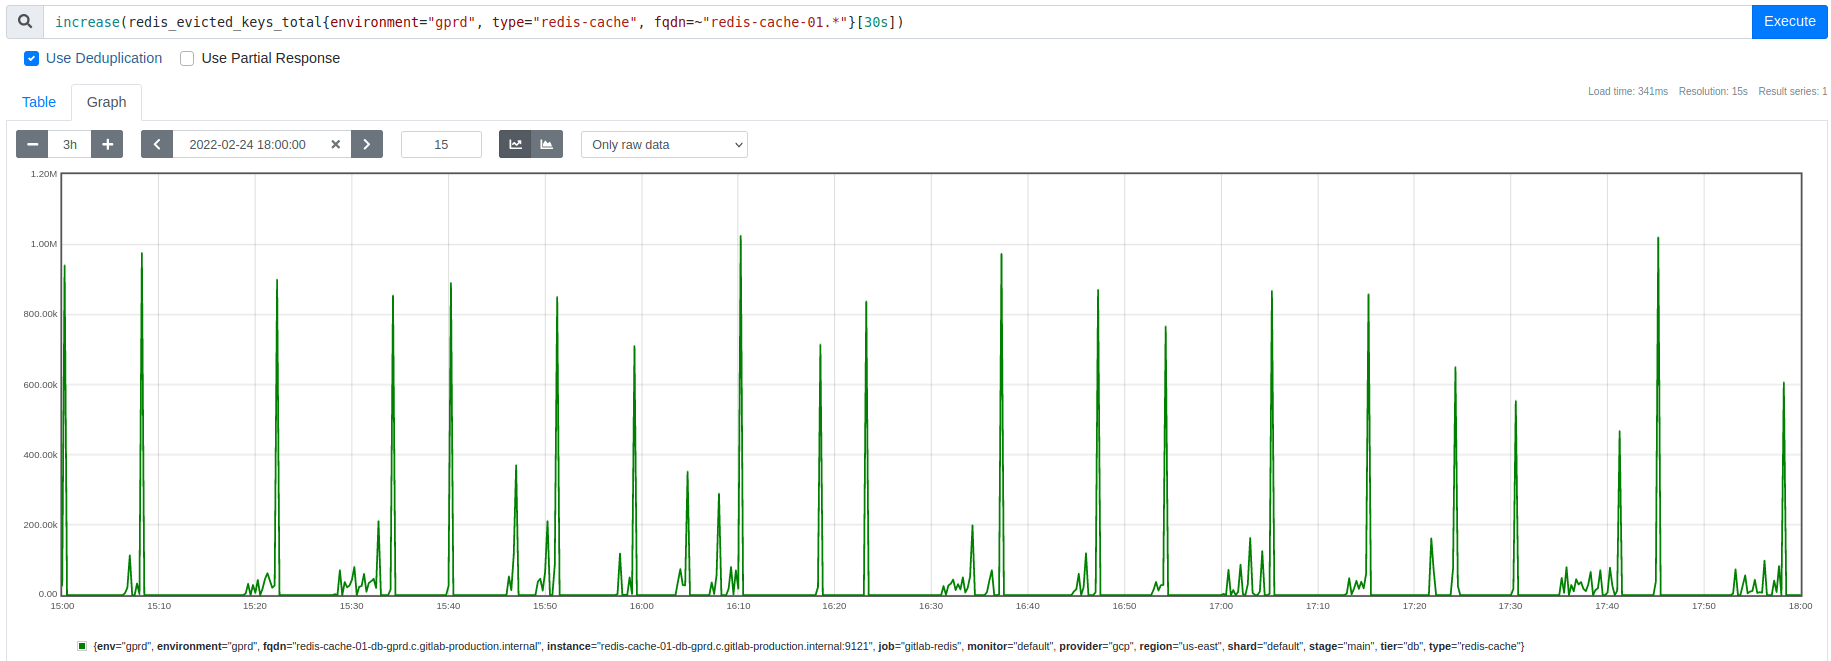 Eviction counter shows a large spike each time the previous graph showed a large memory usage drop